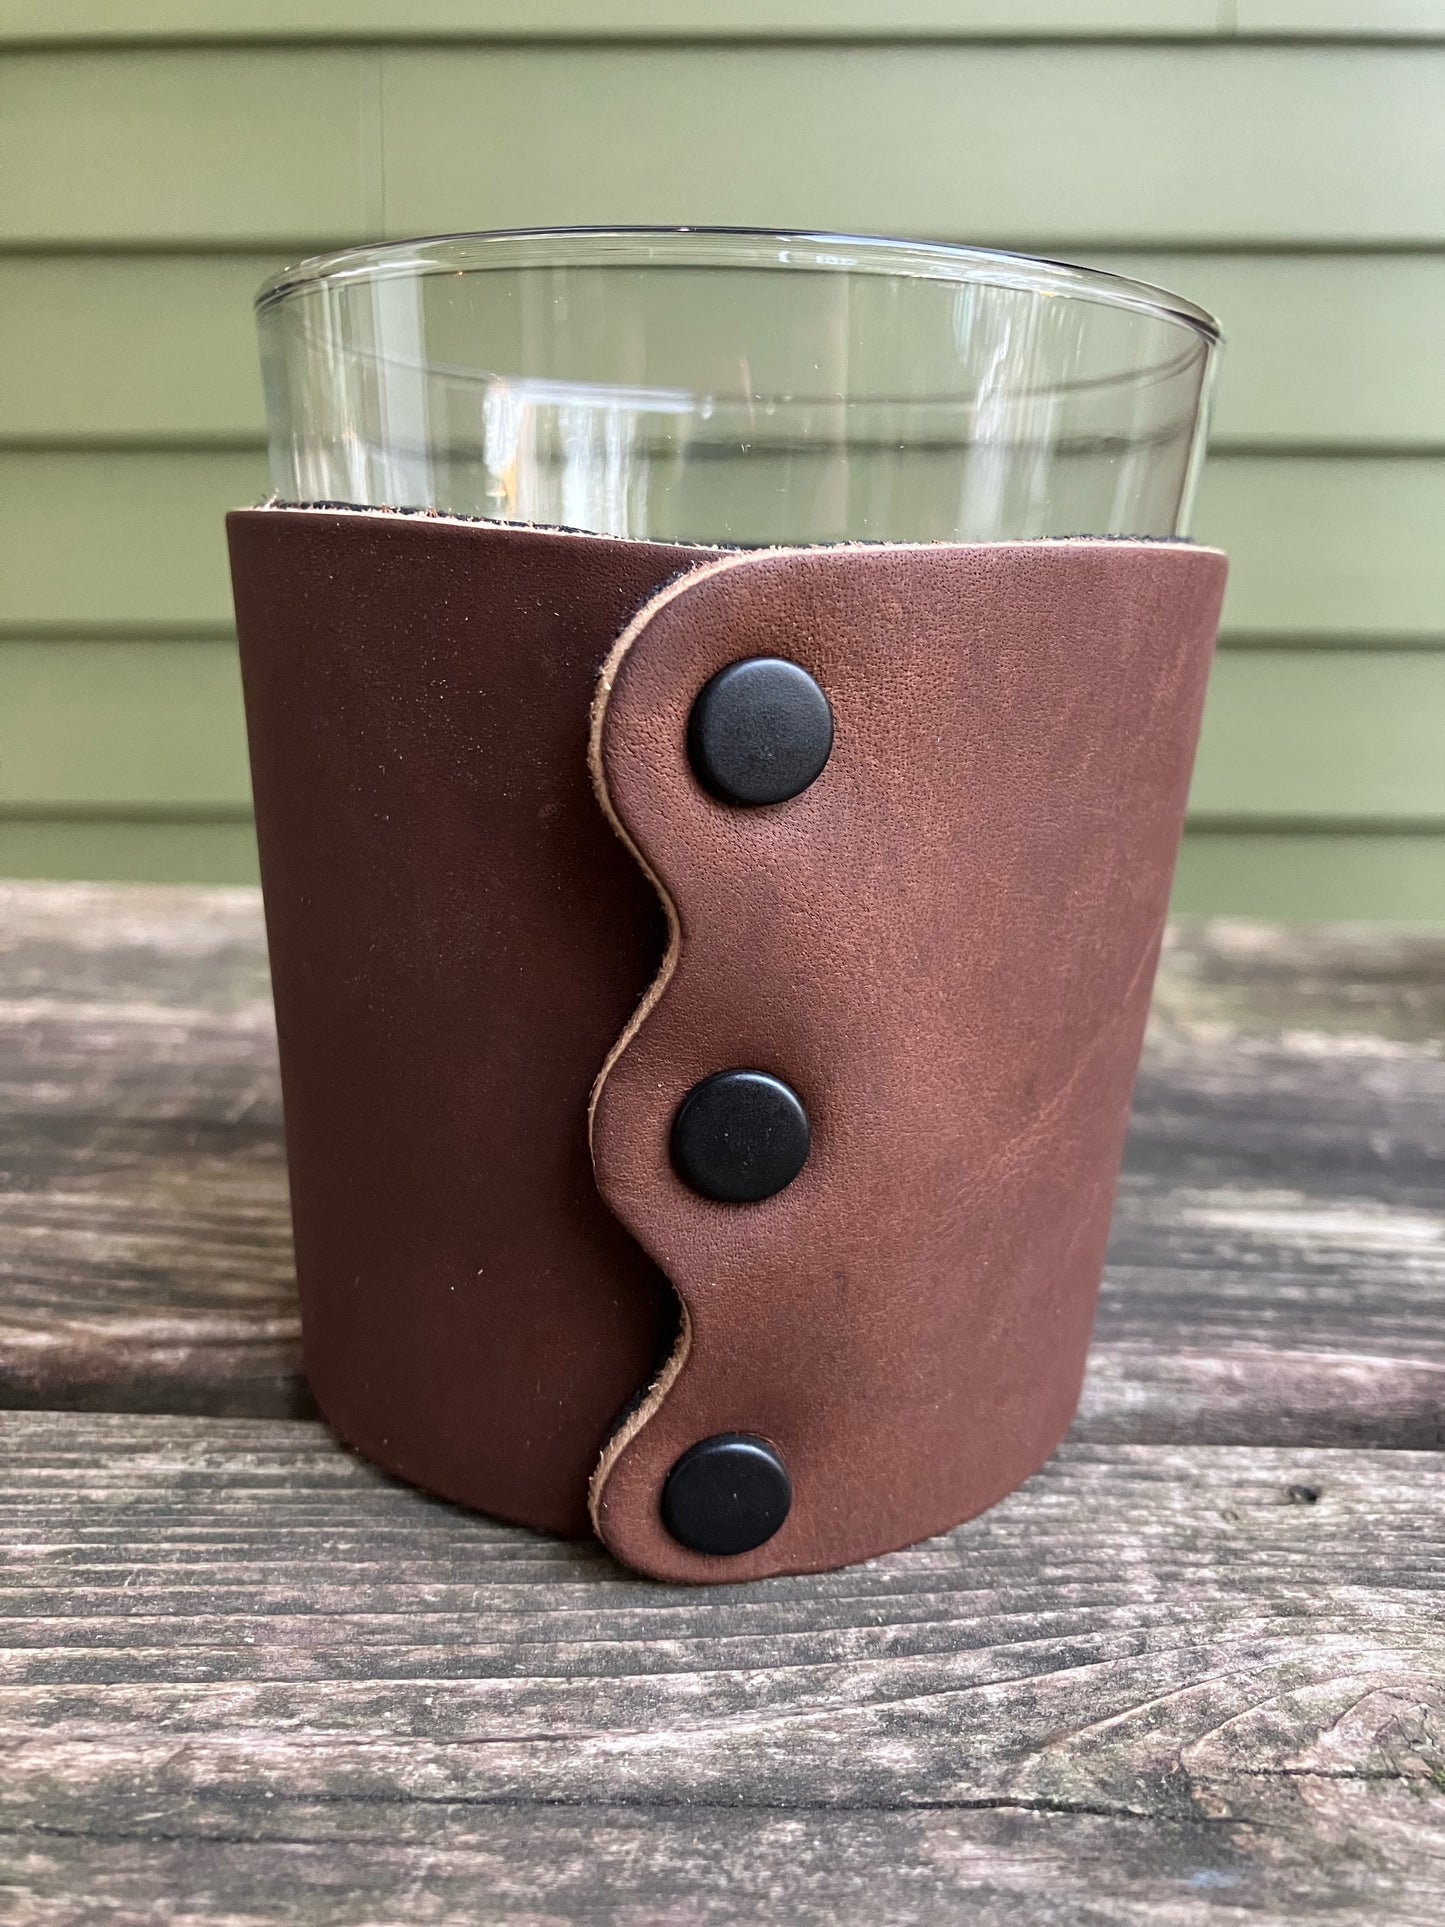 Leather Wrapped Whiskey Glass - Employee of the Month Runner-up